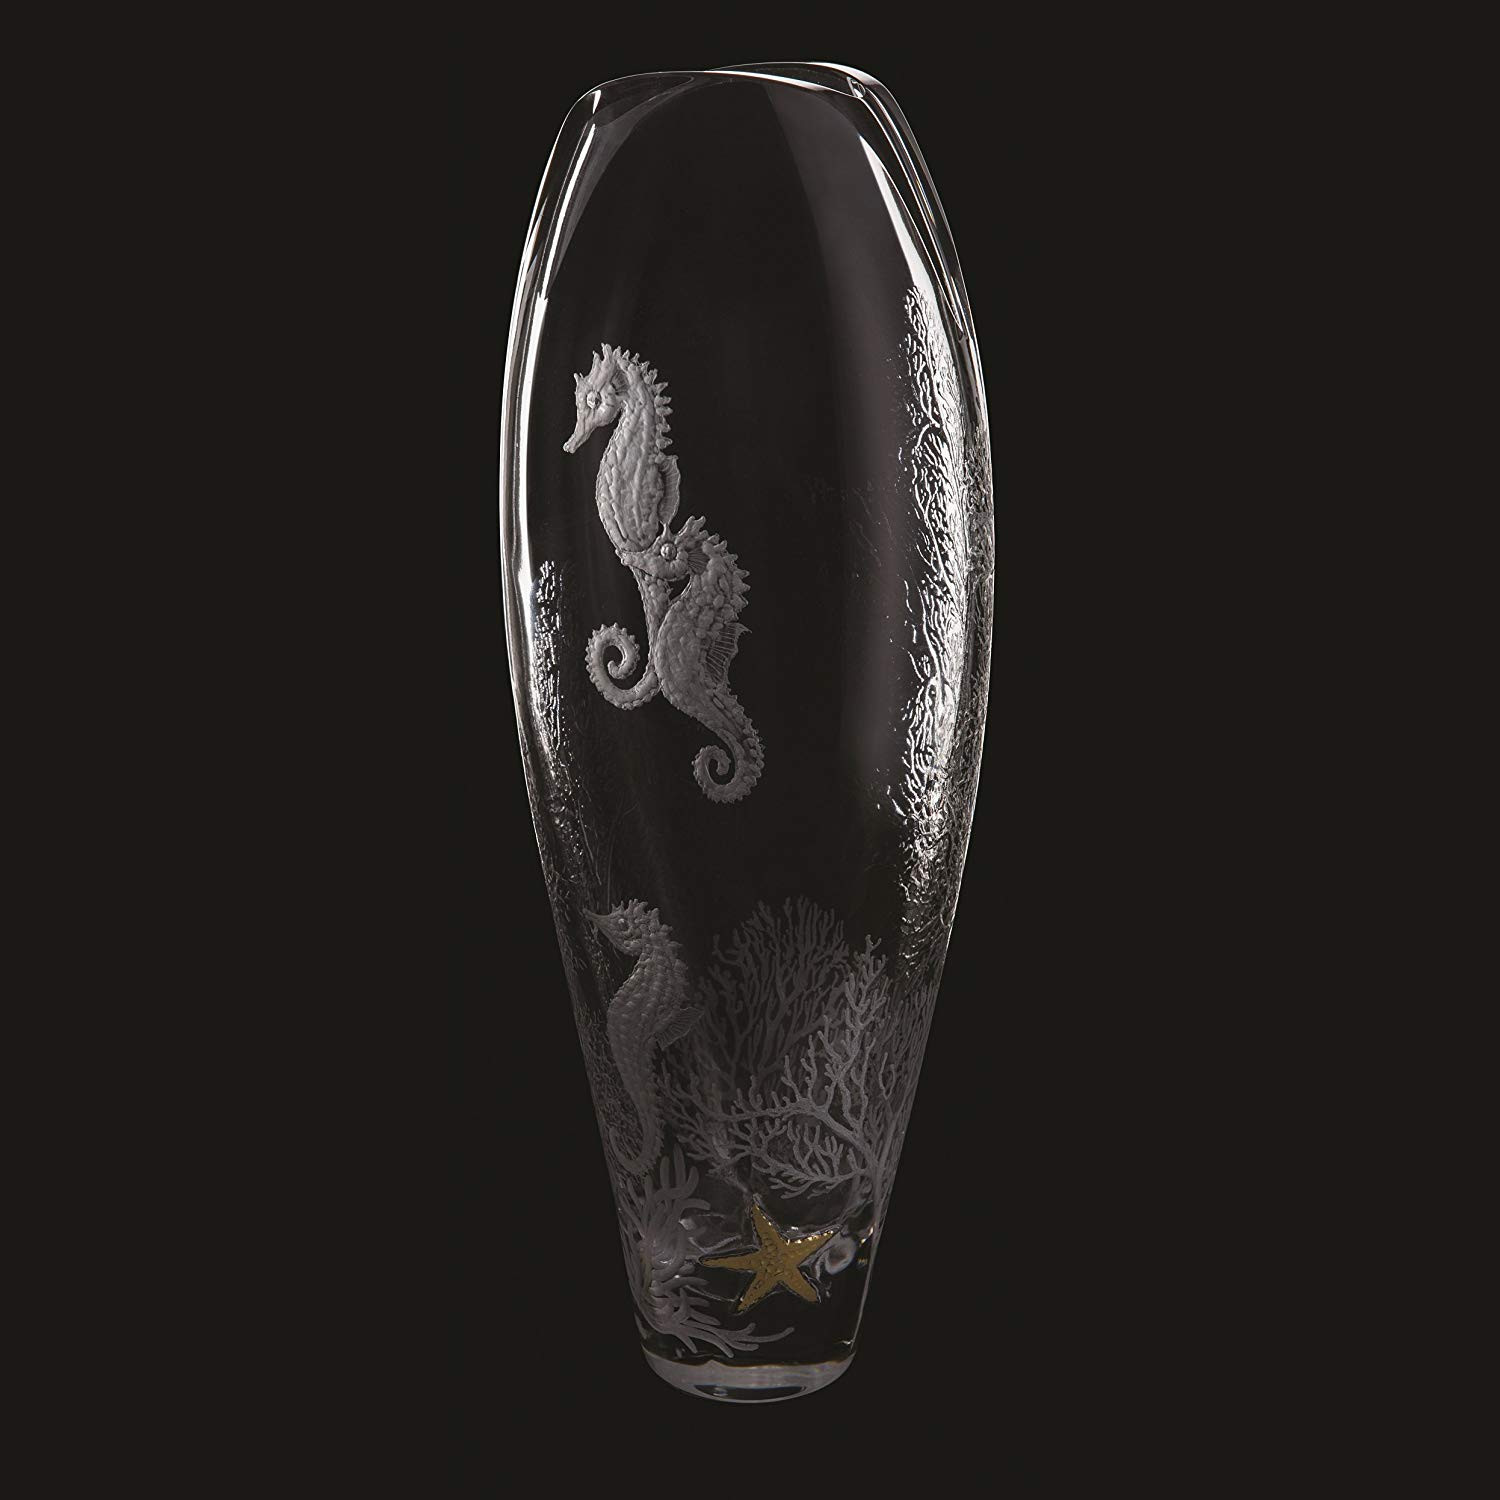 25 Best Large Glass Fish Vase 2024 free download large glass fish vase of dartington crystal tall large seahorse glass vase wedding home party throughout dartington crystal tall large seahorse glass vase wedding home party vintage uk